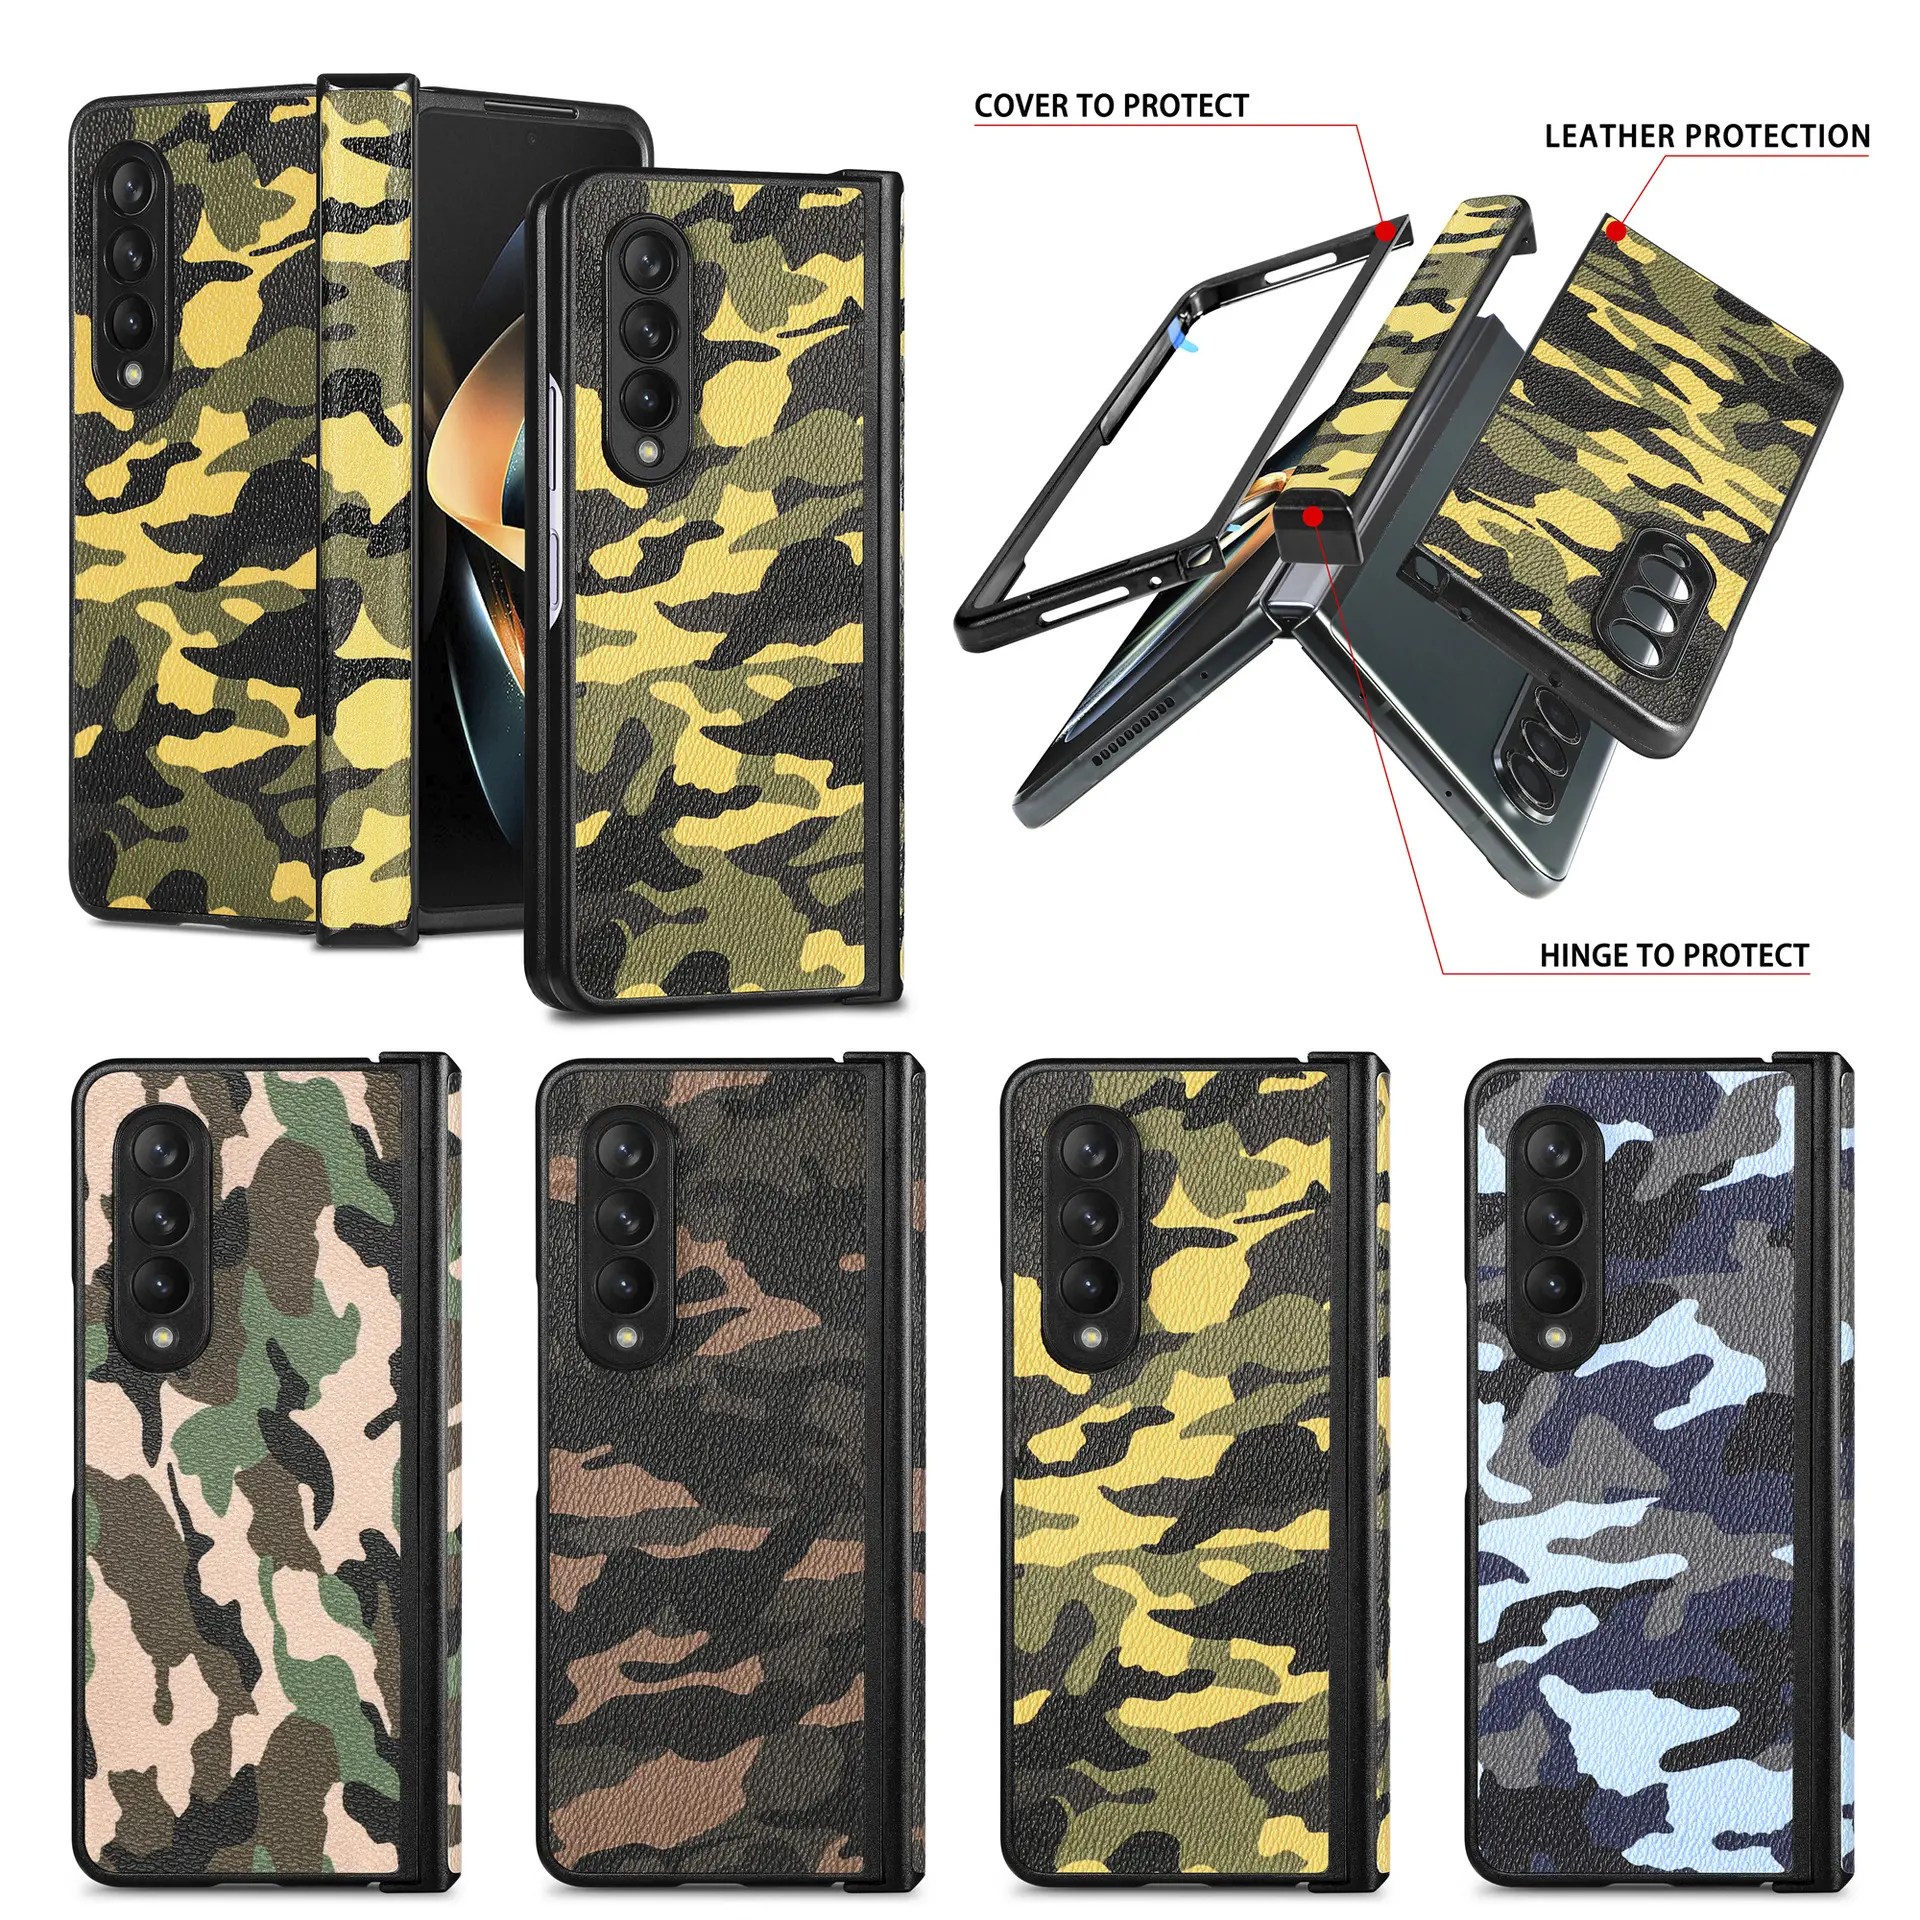 Camouflage Pu Leather Hard Pc Case with Hinge Protective Back Cover 4 5g for Samsung Galaxy Z Fold 4 Fold 3 Flip Opp Bag Gua